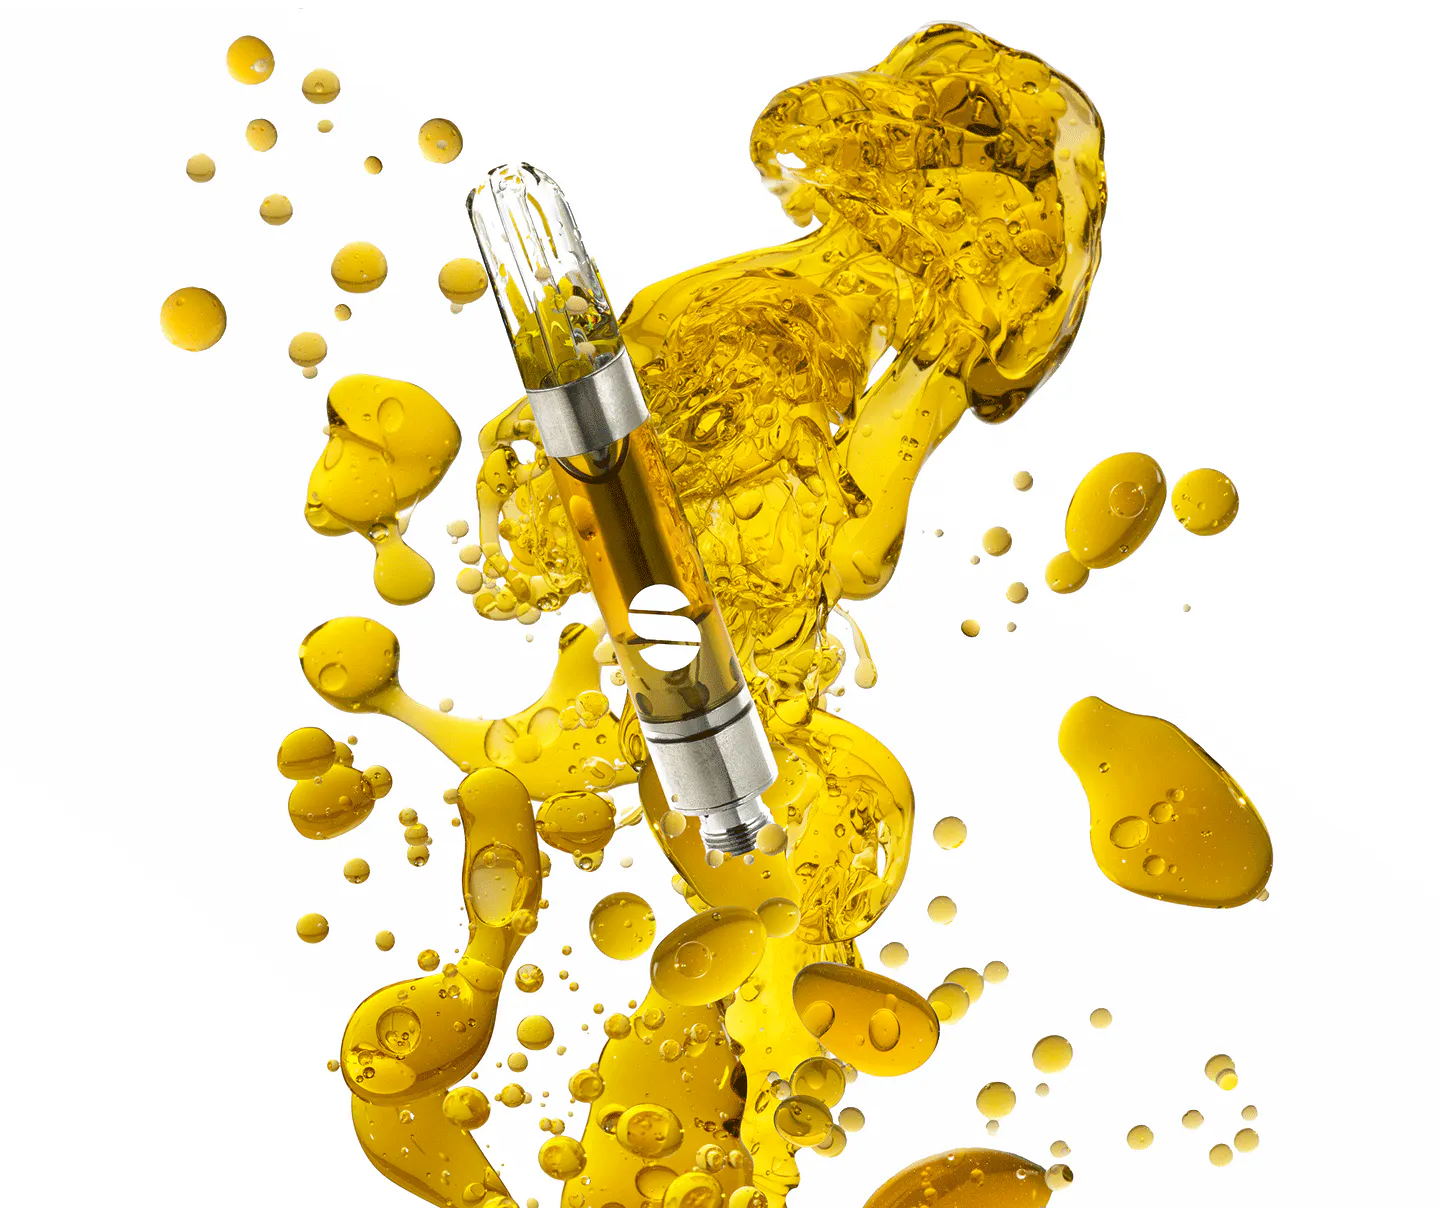 Select oil cartridge background